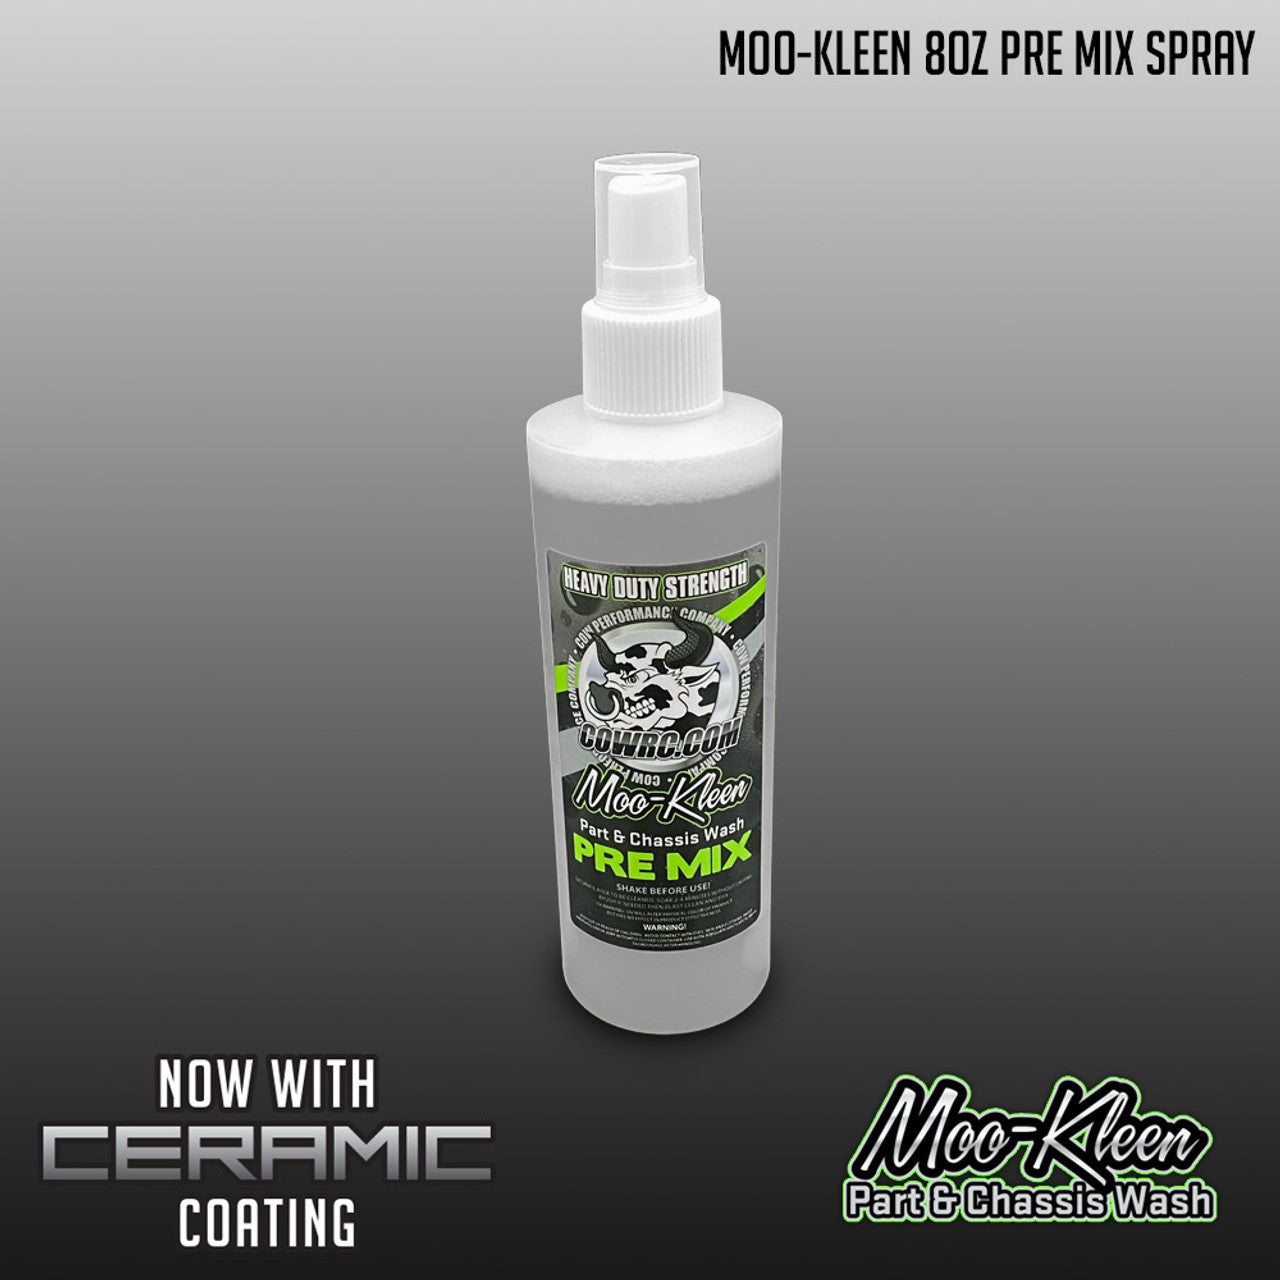 MOO-CLEAN PARTS AND CHASSIS WASH 8OZ PRE MIX (NEW FORMULA WITH CERAMIC COATING!)